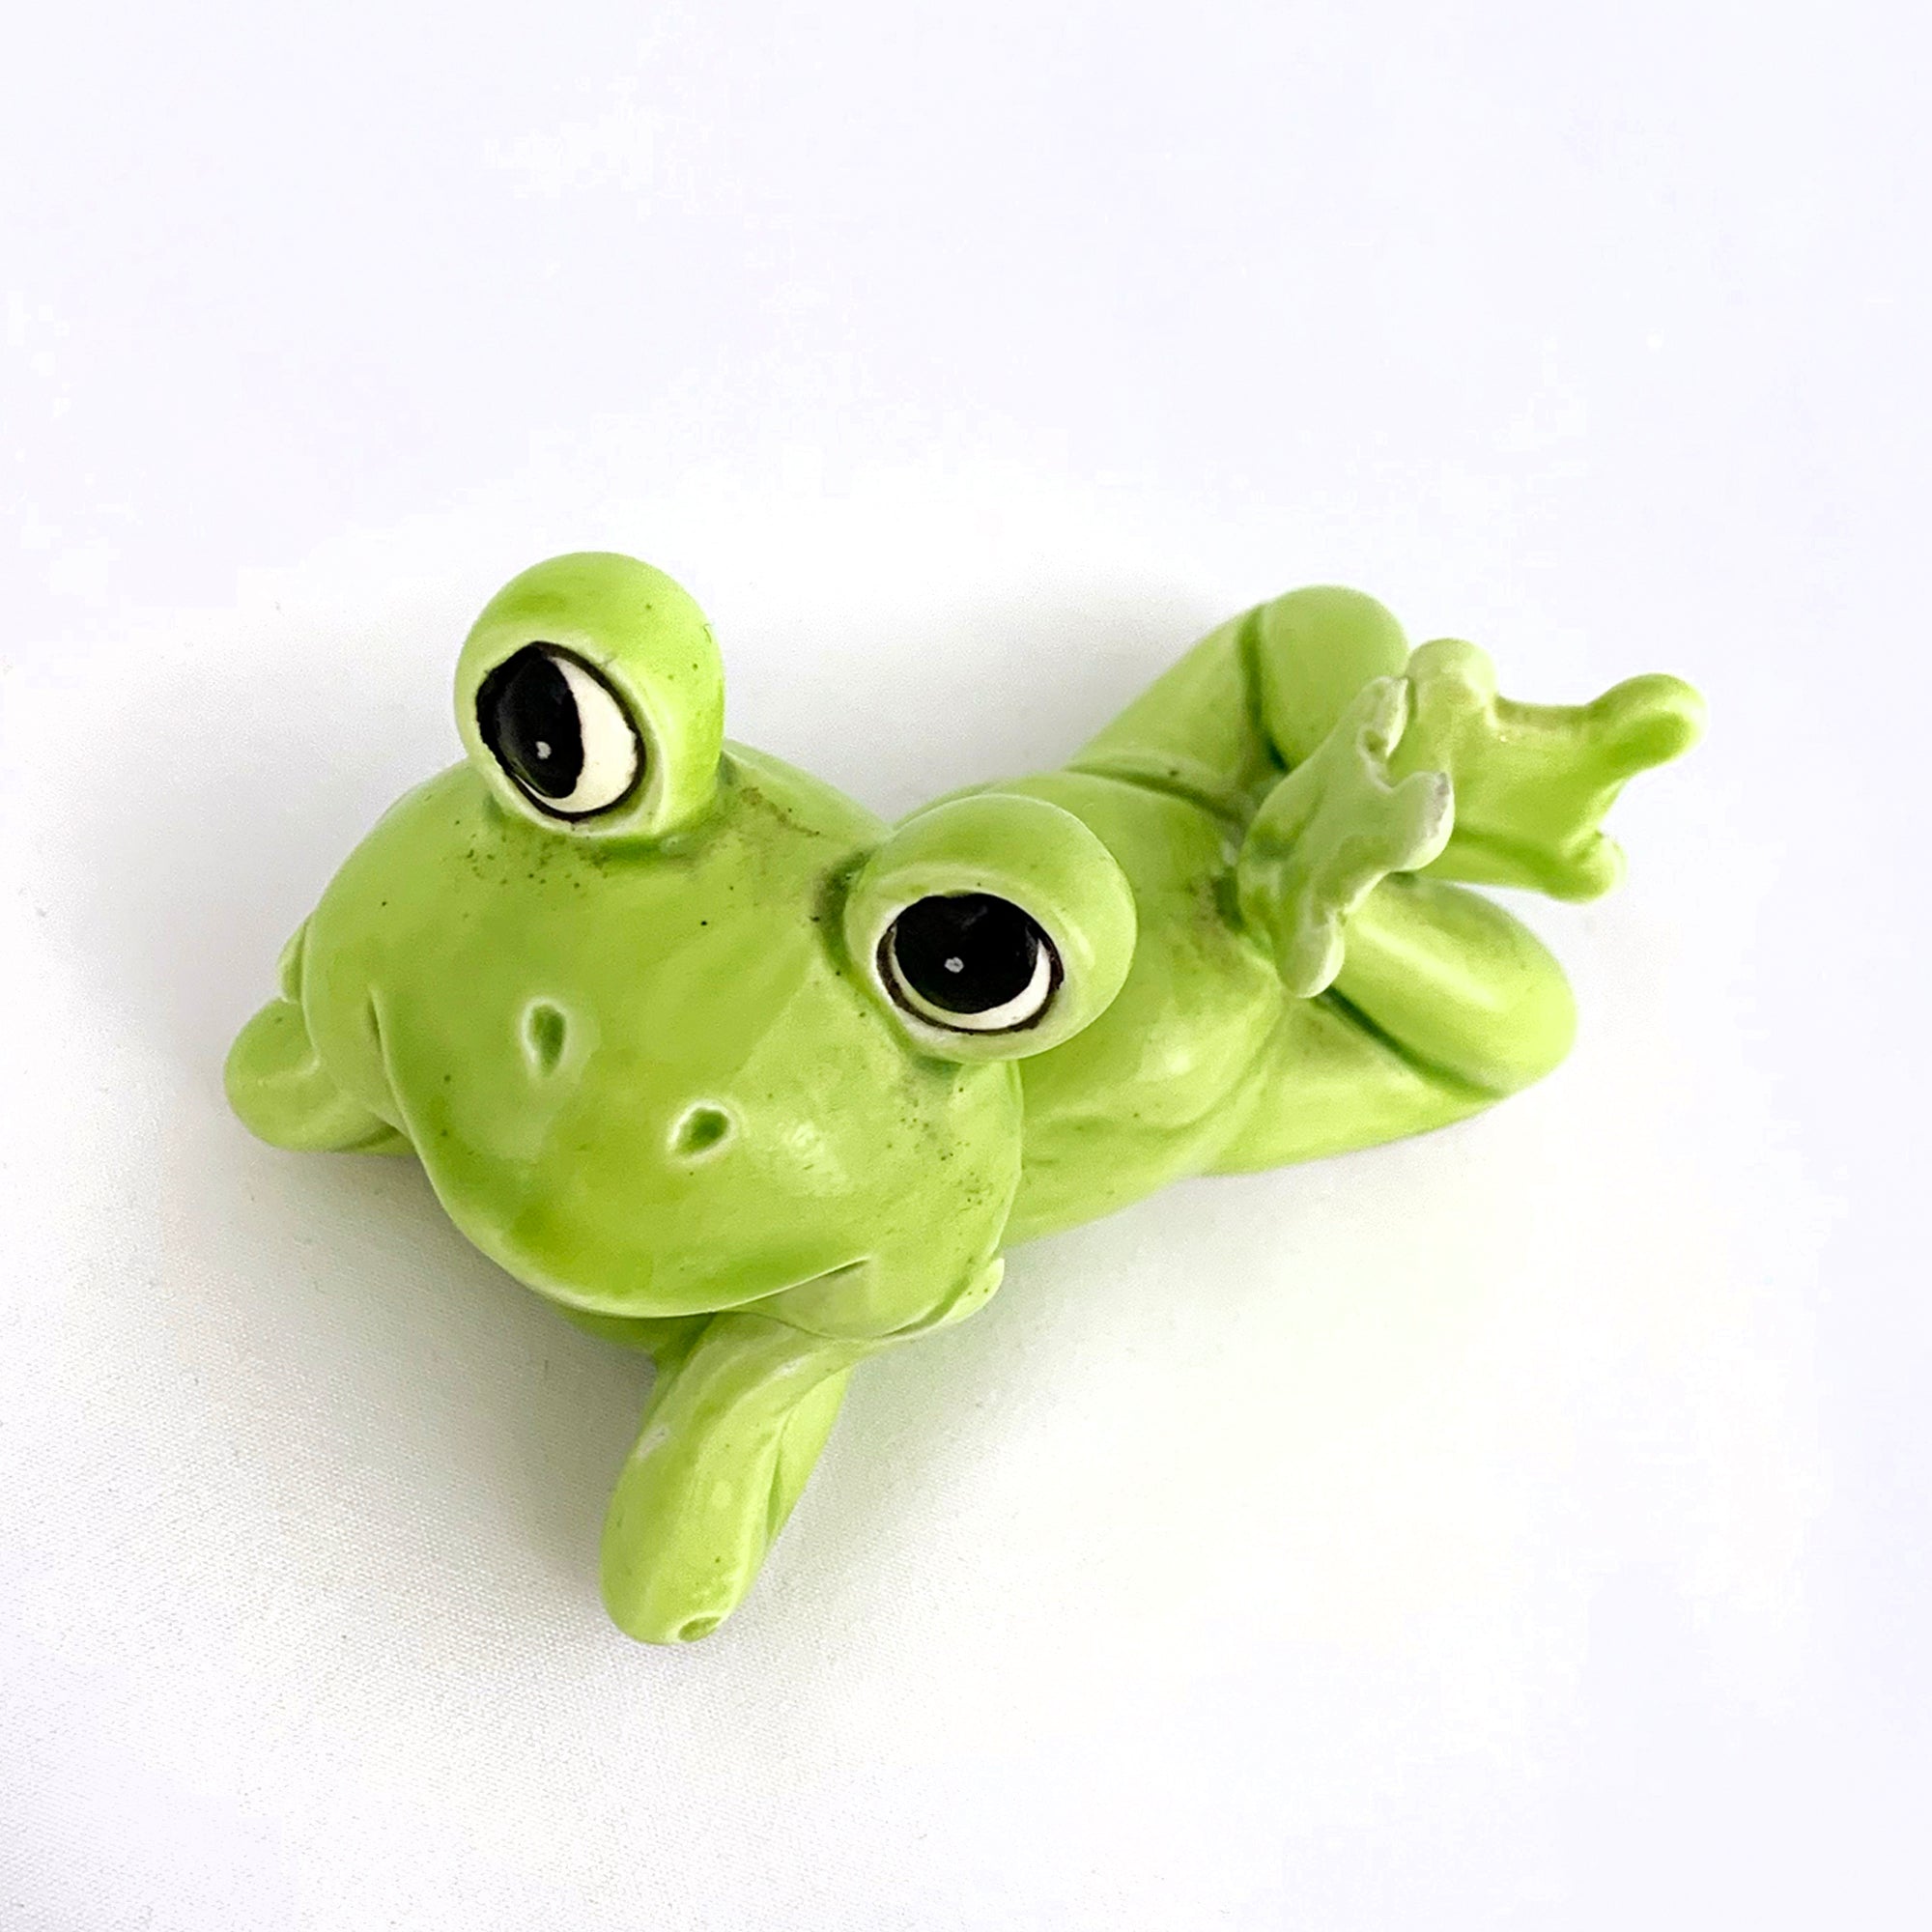 Vintage Mid-Century Ceramic Lime Green Smiling Resting Frog Figurine, –  Jack's Daughter of All Trades